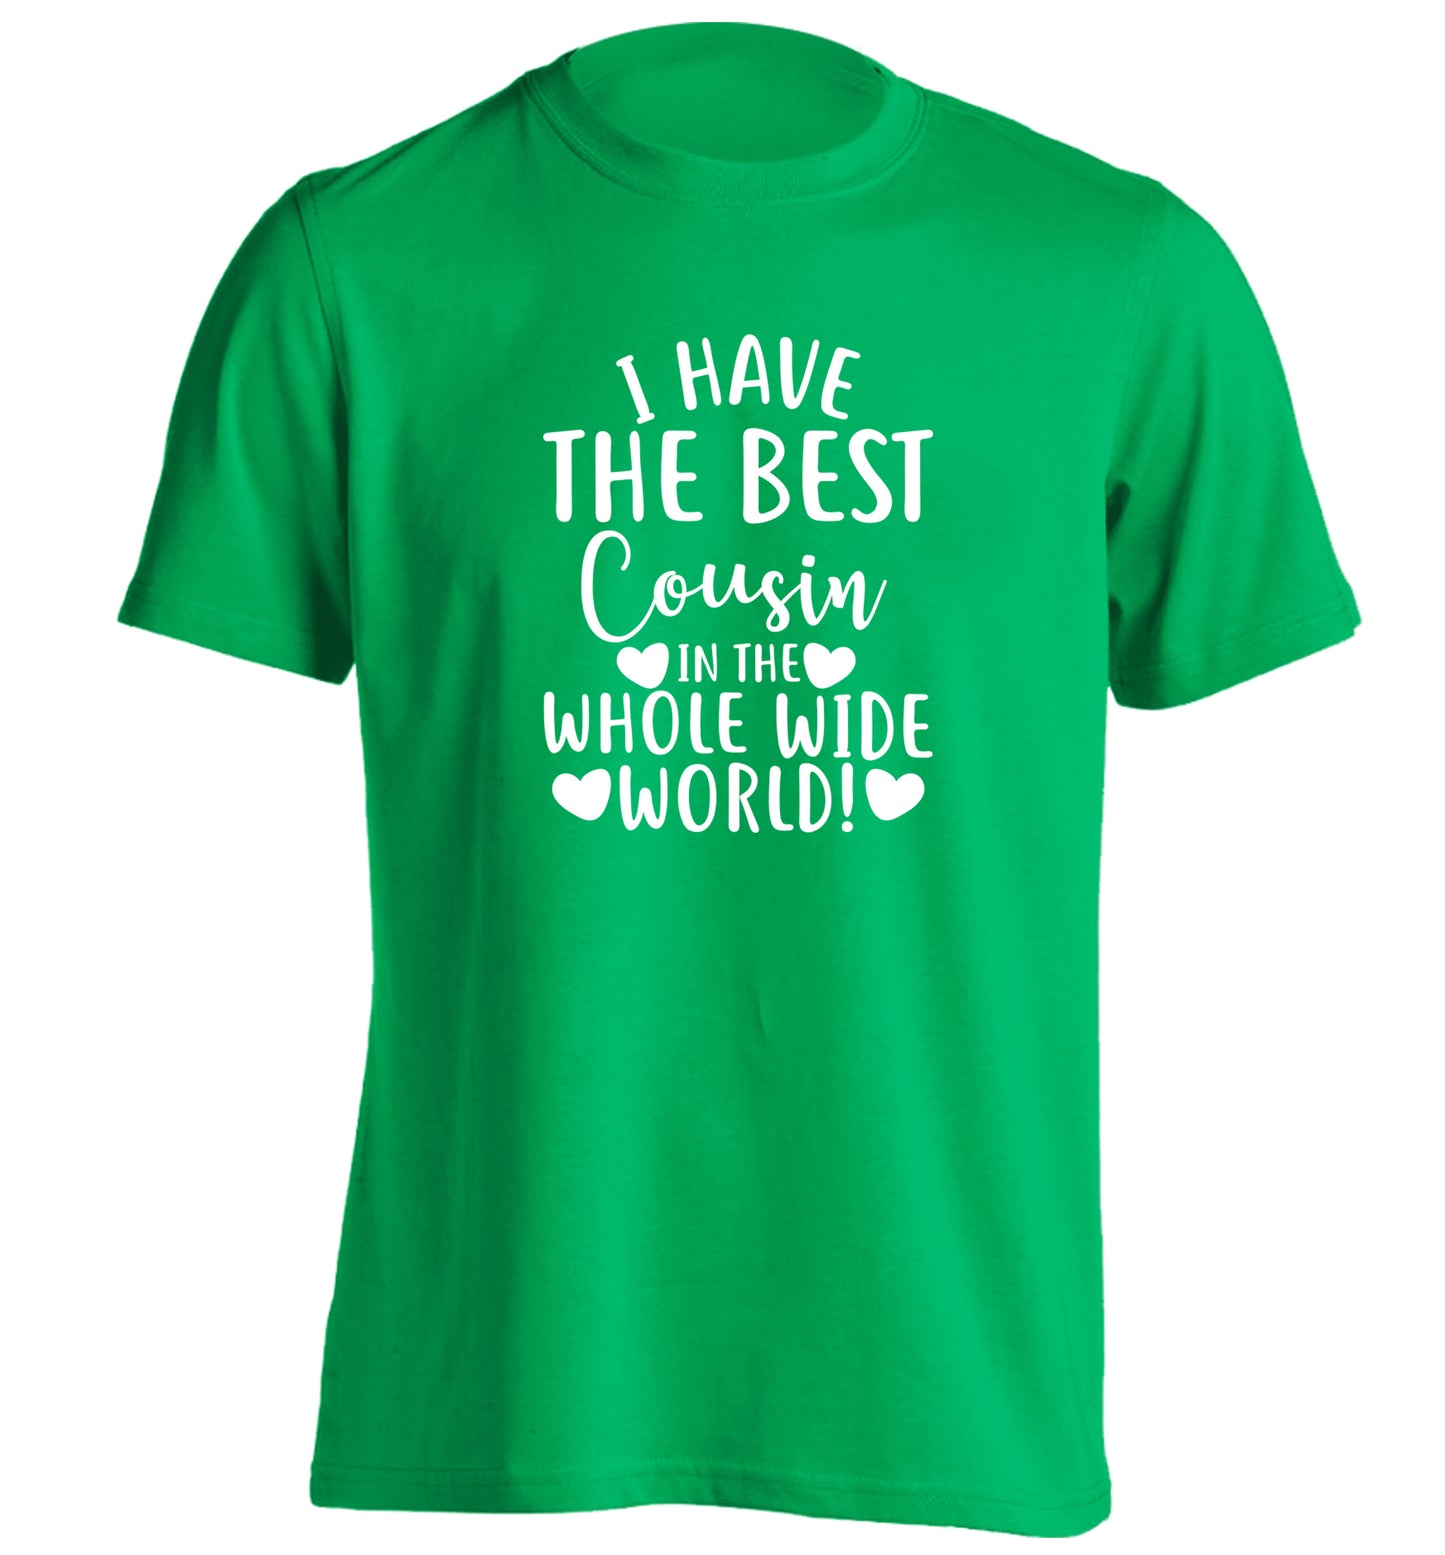 I have the best cousin in the whole wide world! adults unisex green Tshirt 2XL